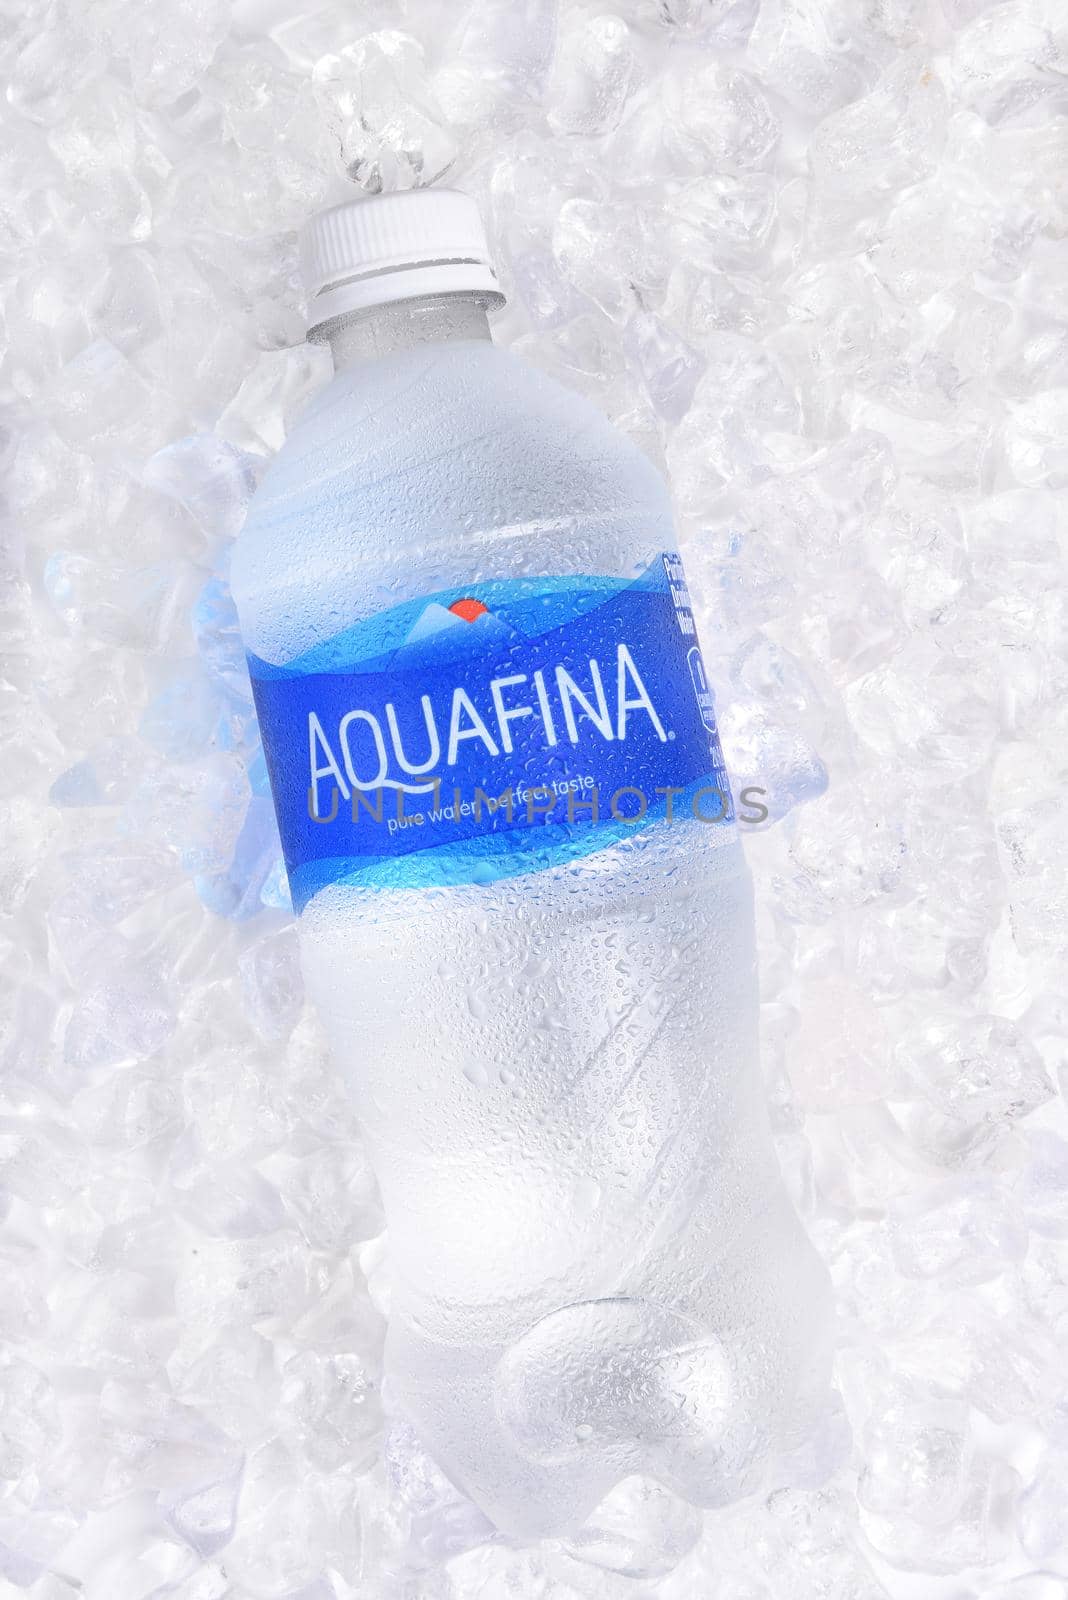 IRVINE, CALIFORNIA - JANUARY 22, 2017: Aquafina Water Bottle on ice. The purified water brand is produced by PepsiCo, in both flavored and unflavored varieties.